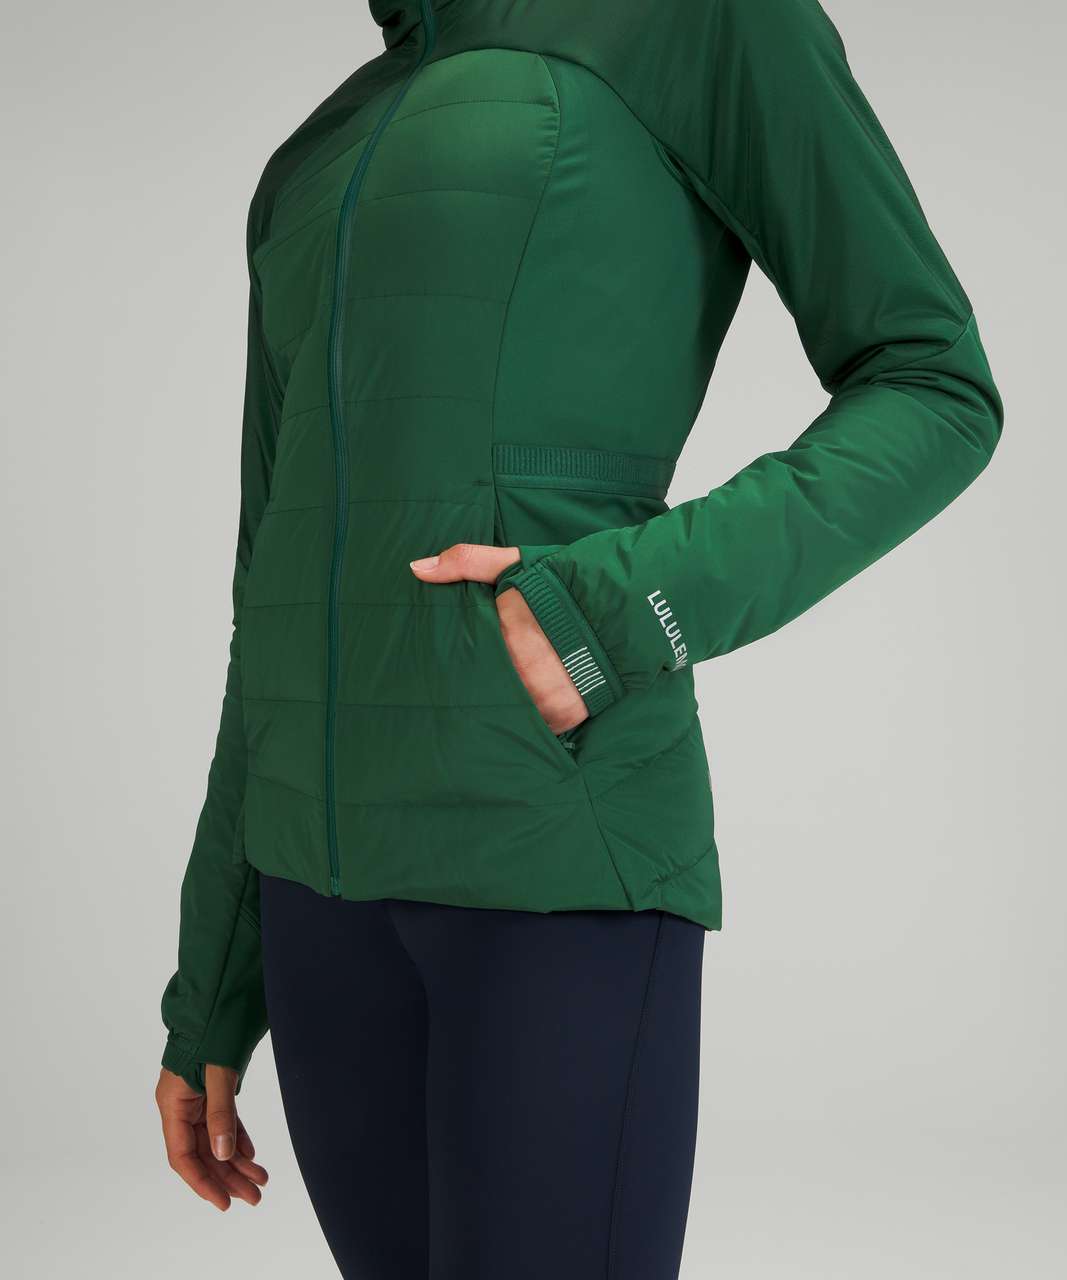 Lululemon Down for It All Jacket - Everglade Green (First Release)